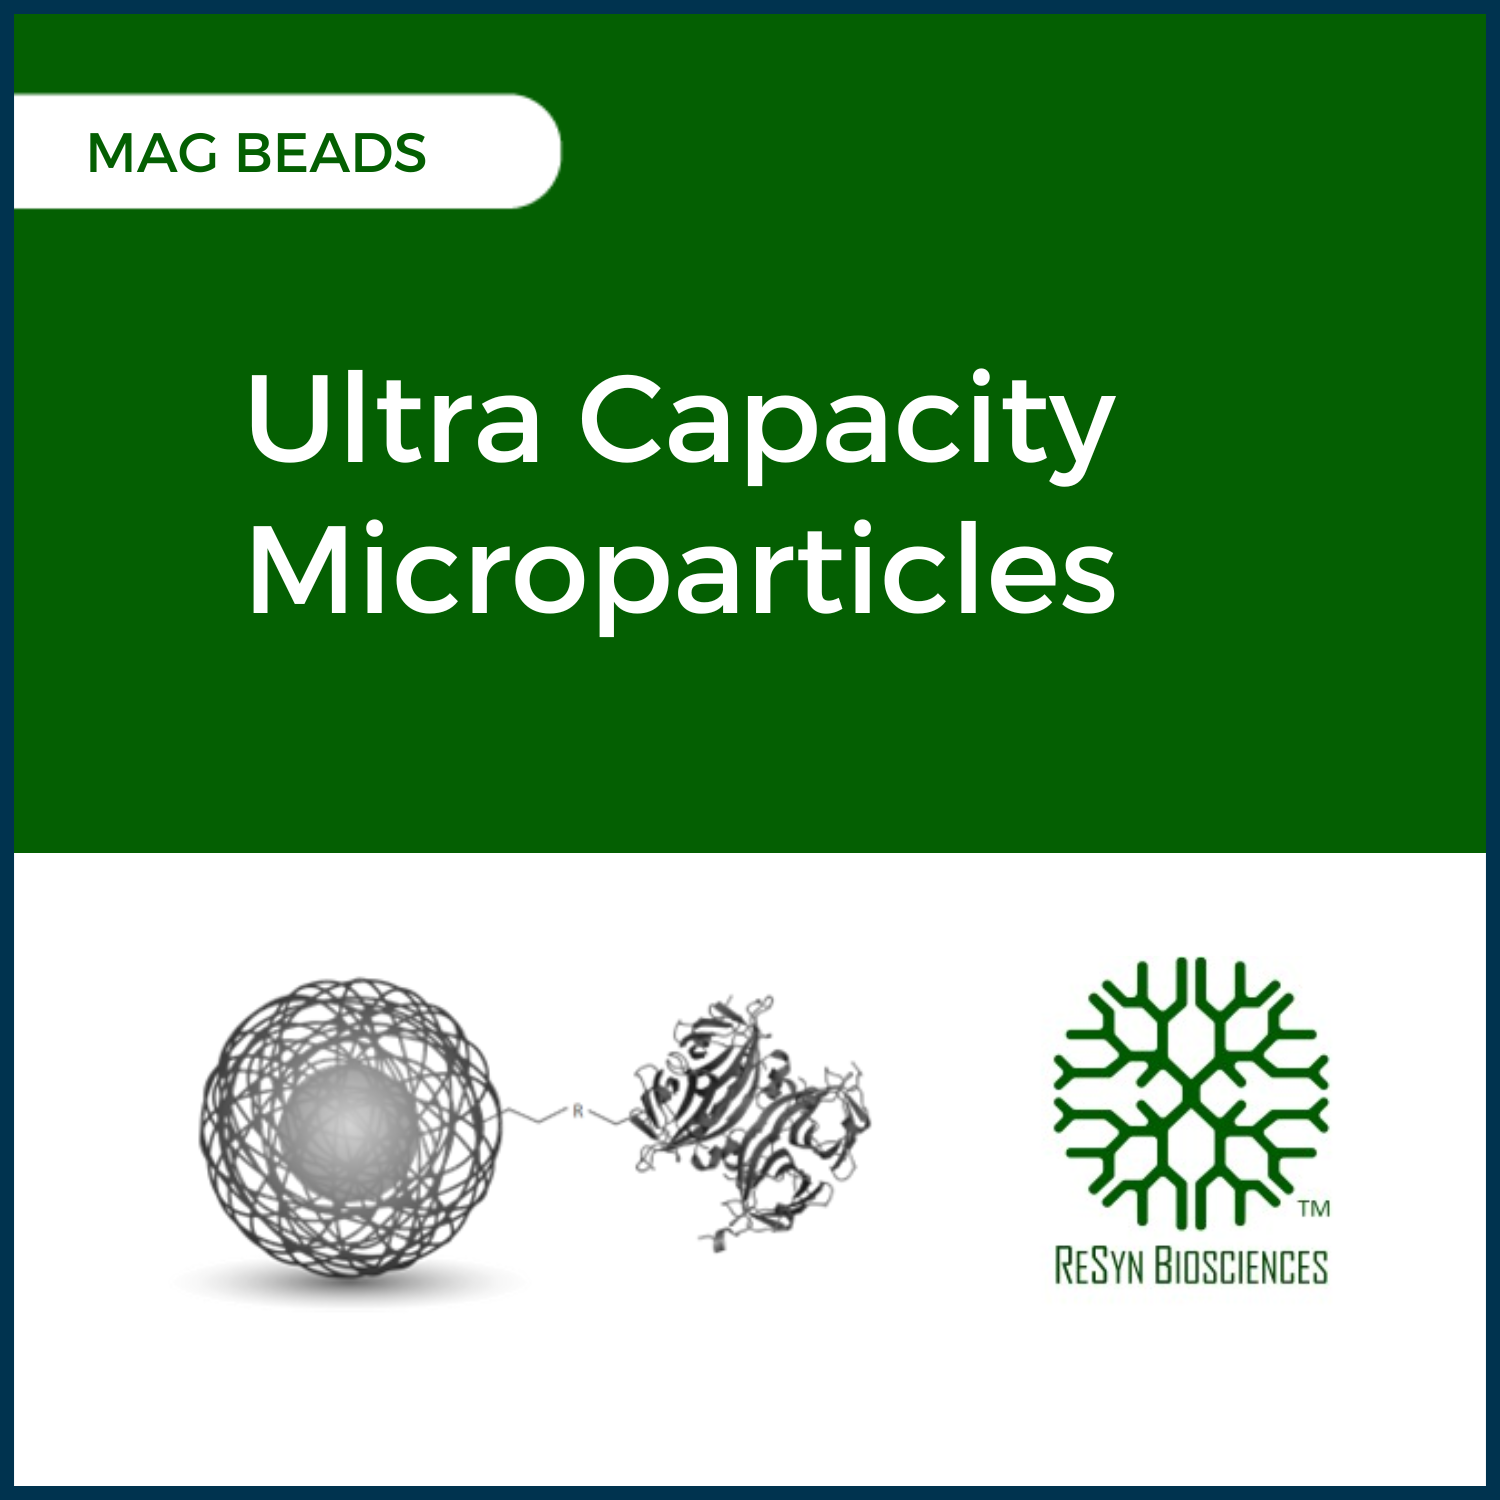 Ultra Capacity Microparticles Mag Beads